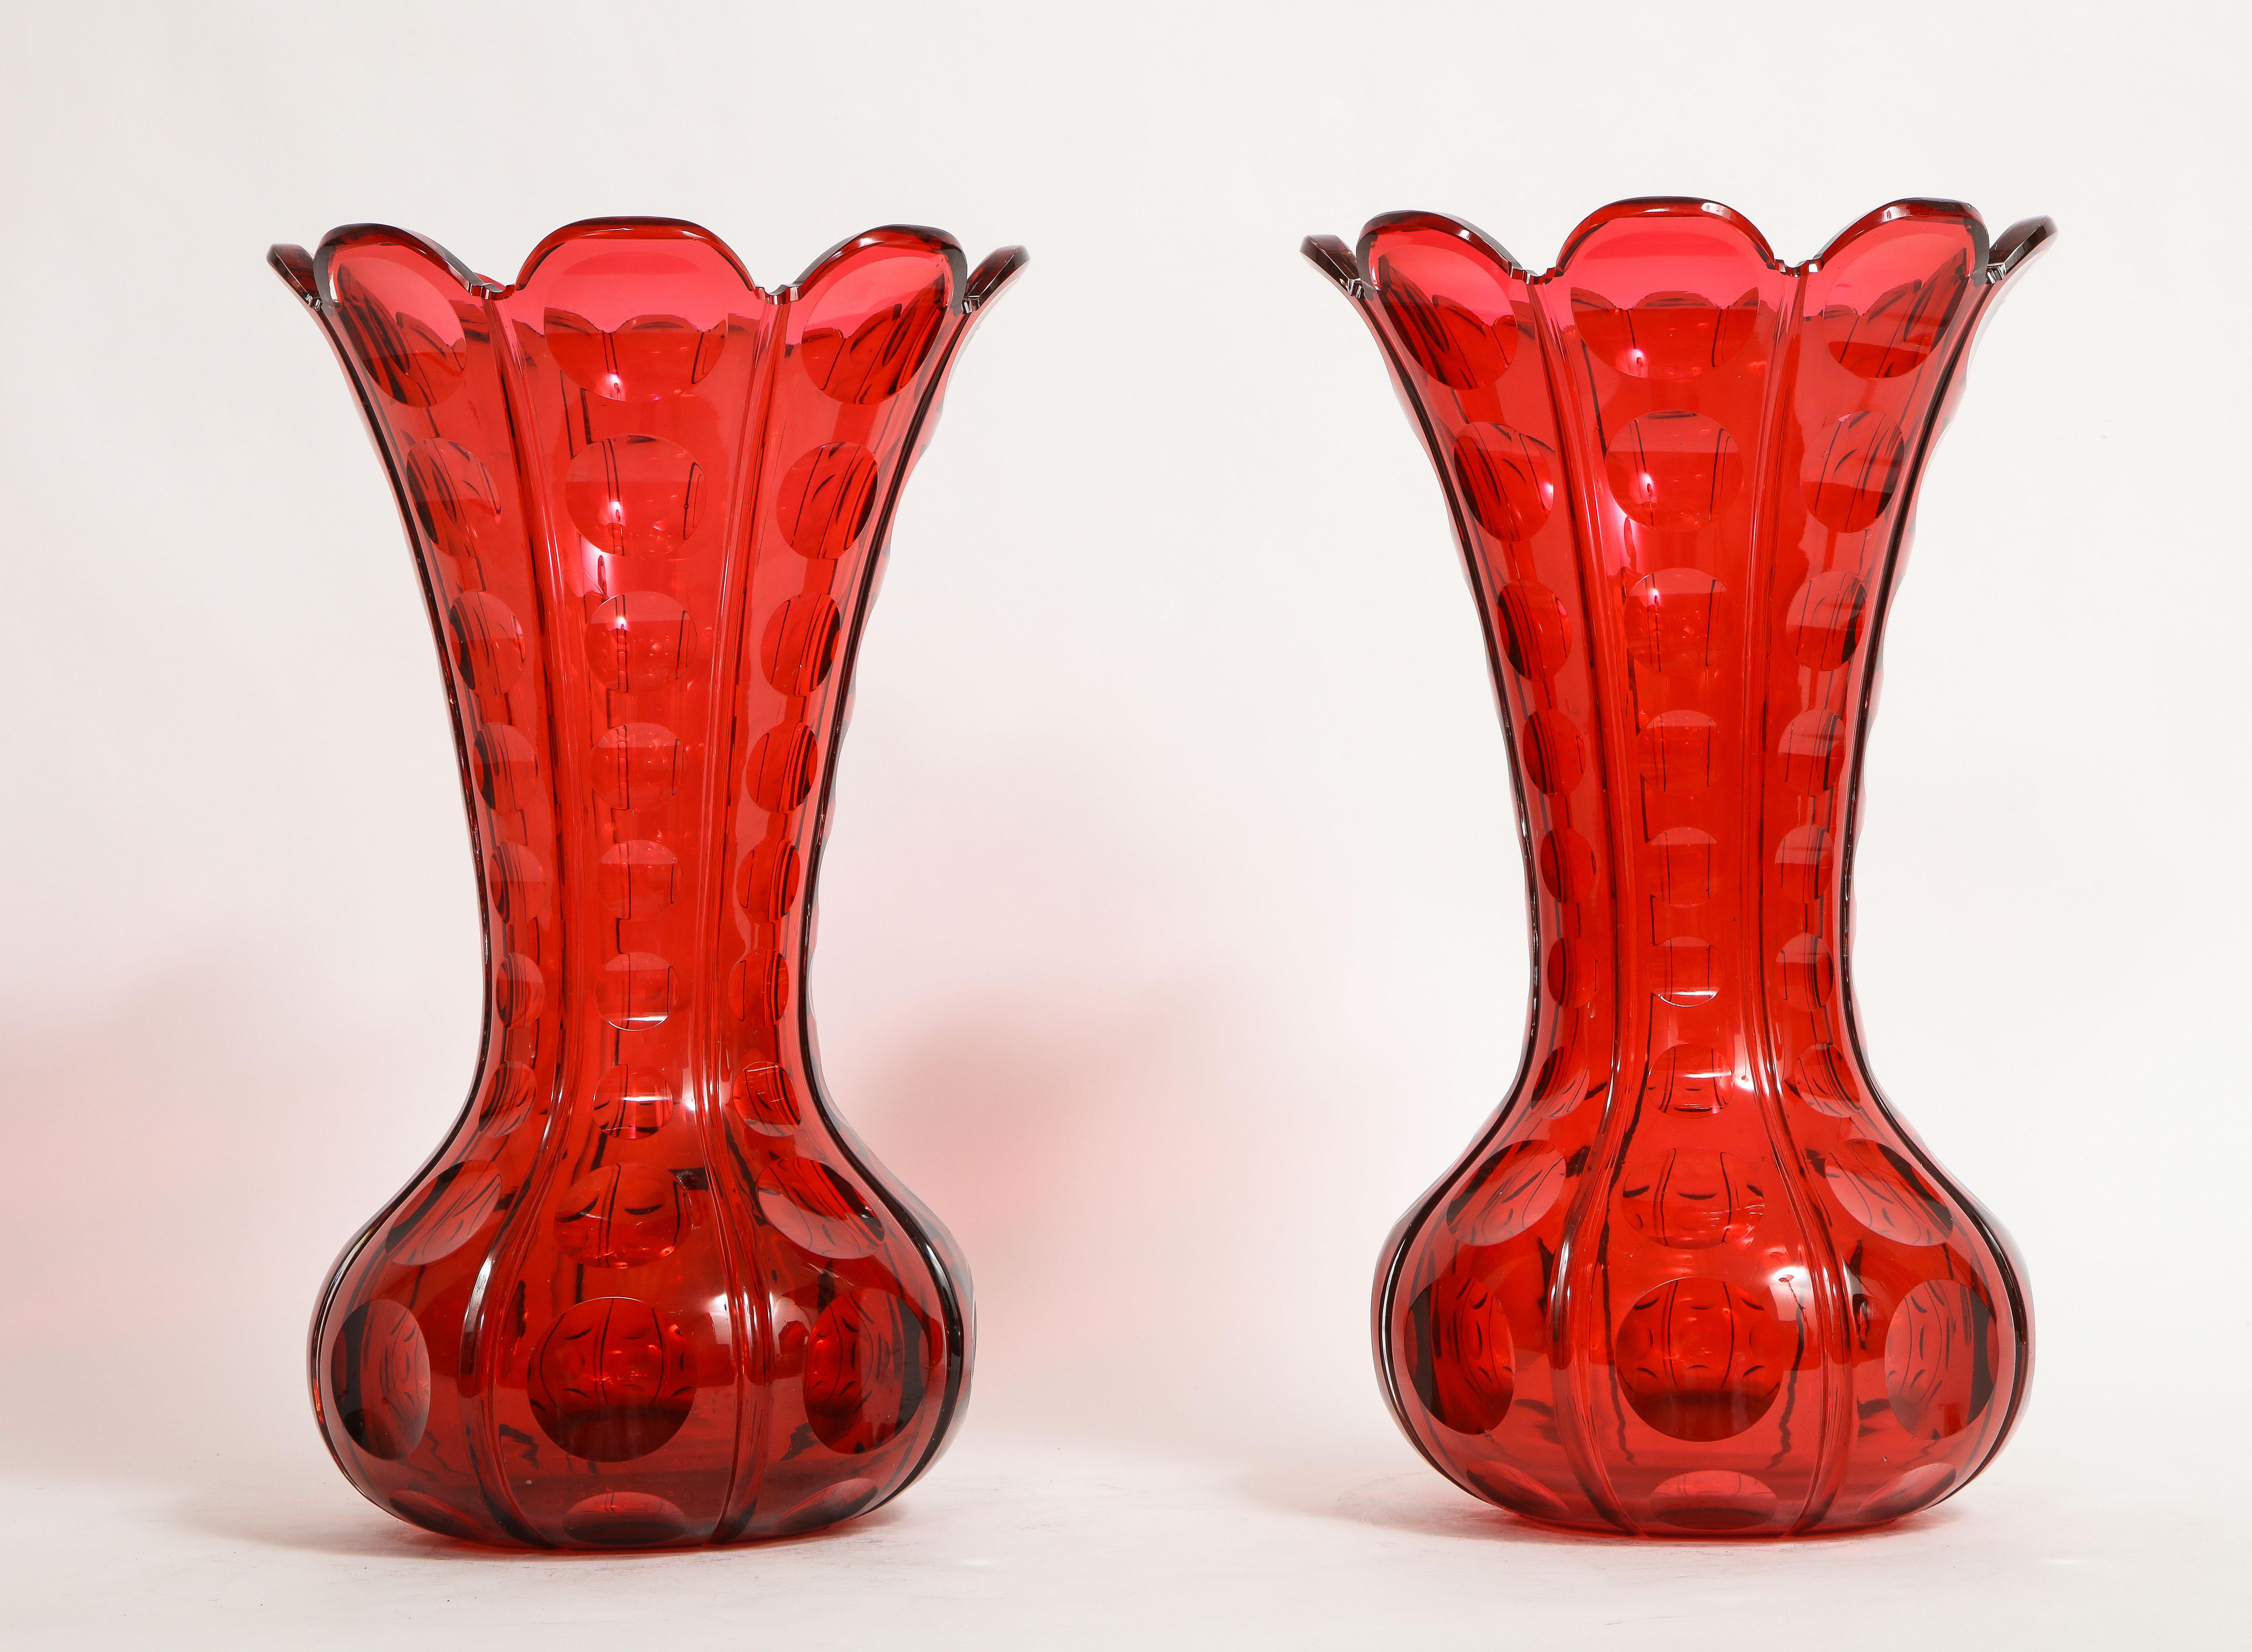 A Fantastic and Rare Pair of 19th Century French Baccarat Ruby Red Crystal Vases of Magnificent Quality. Each is beautifully hand-carved and detailed with the finest ruby red crystal manufactured by Baccarat in France. They are designed like two